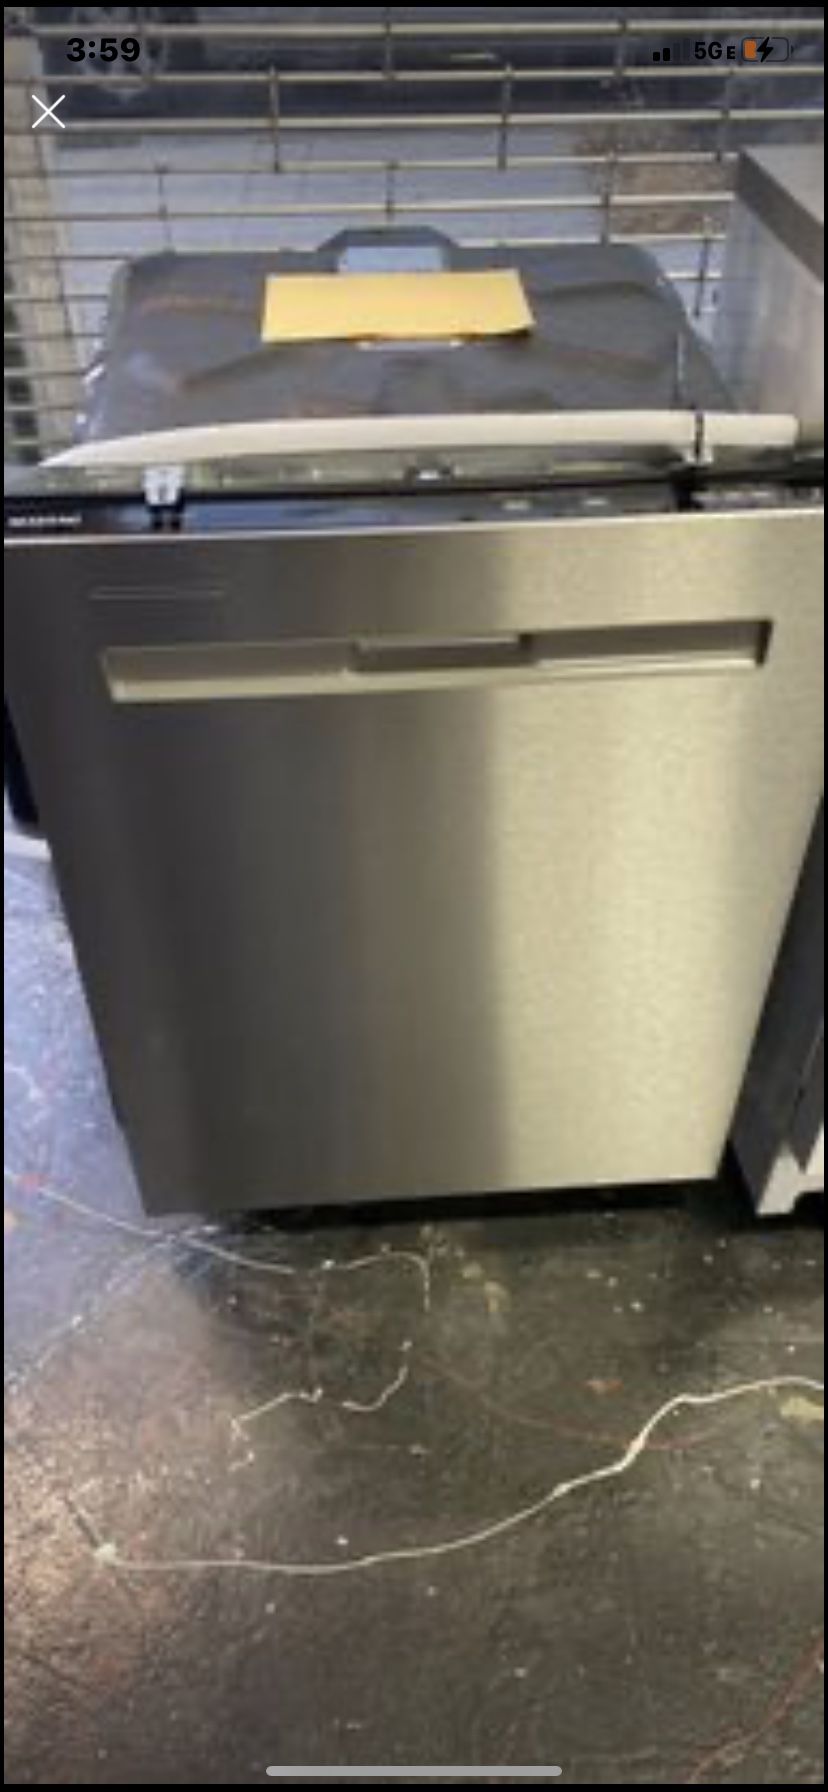 Maytag - Top Control Built-In Dishwasher with Stainless Steel Tub, Dual Power Filtration, 3rd Rack, 47dBA - Stainless steel Model:MDB8959SKZ. New out 